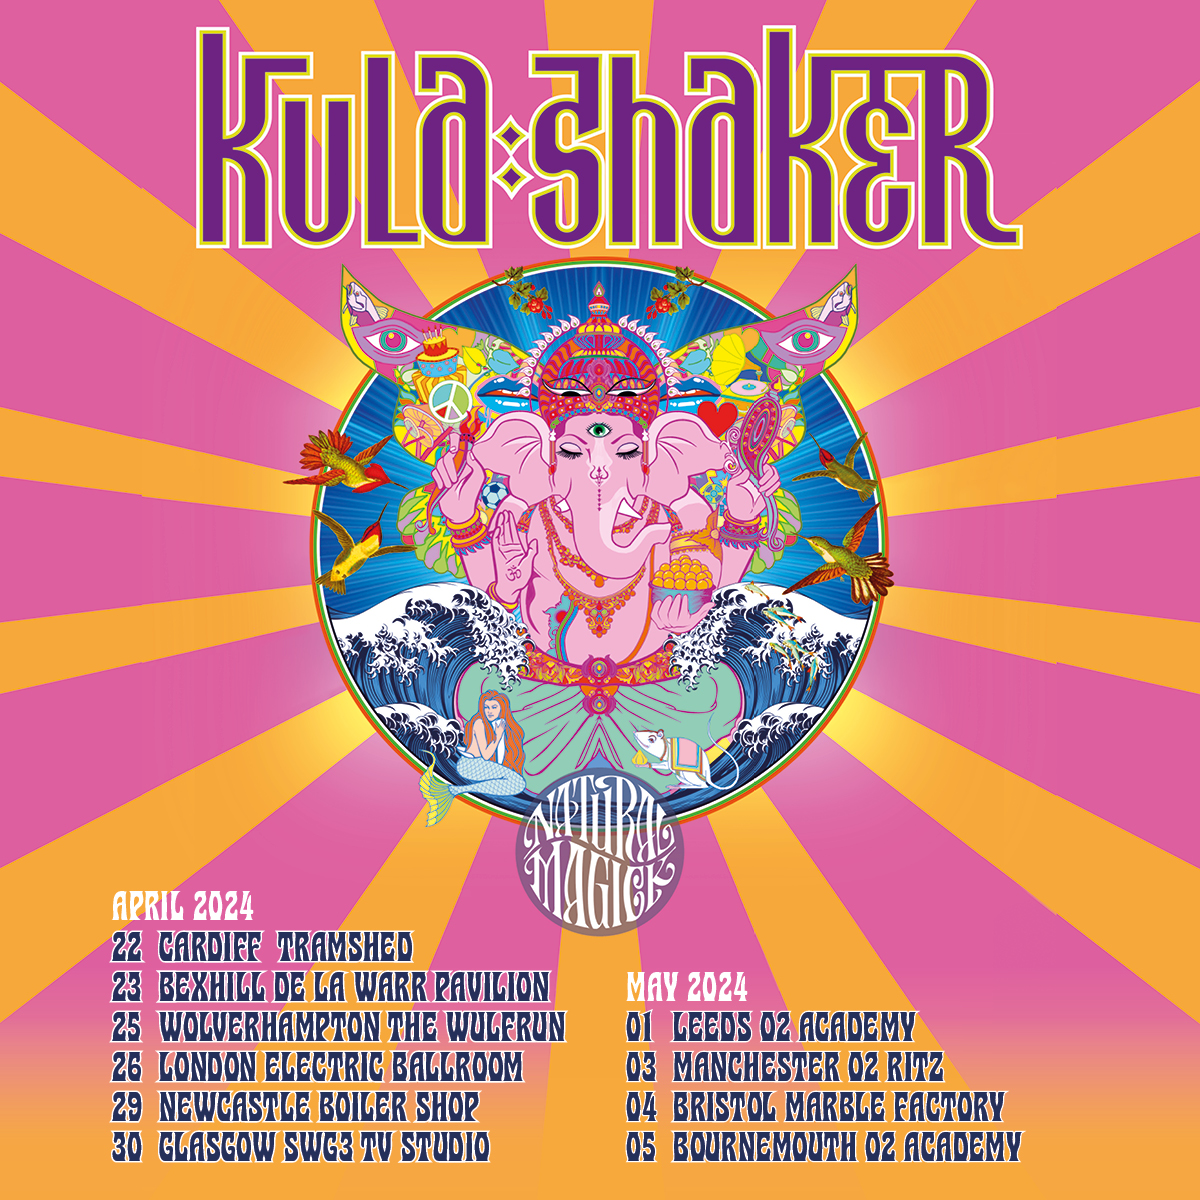 English psych rock band @kulashaker are here tonight in support of their seventh album 'Natural Magick.'🪄 Doors at 7pm. Our usual security measures are in place - no bags bigger than A4 - please check our pinned tweet for details 🙏